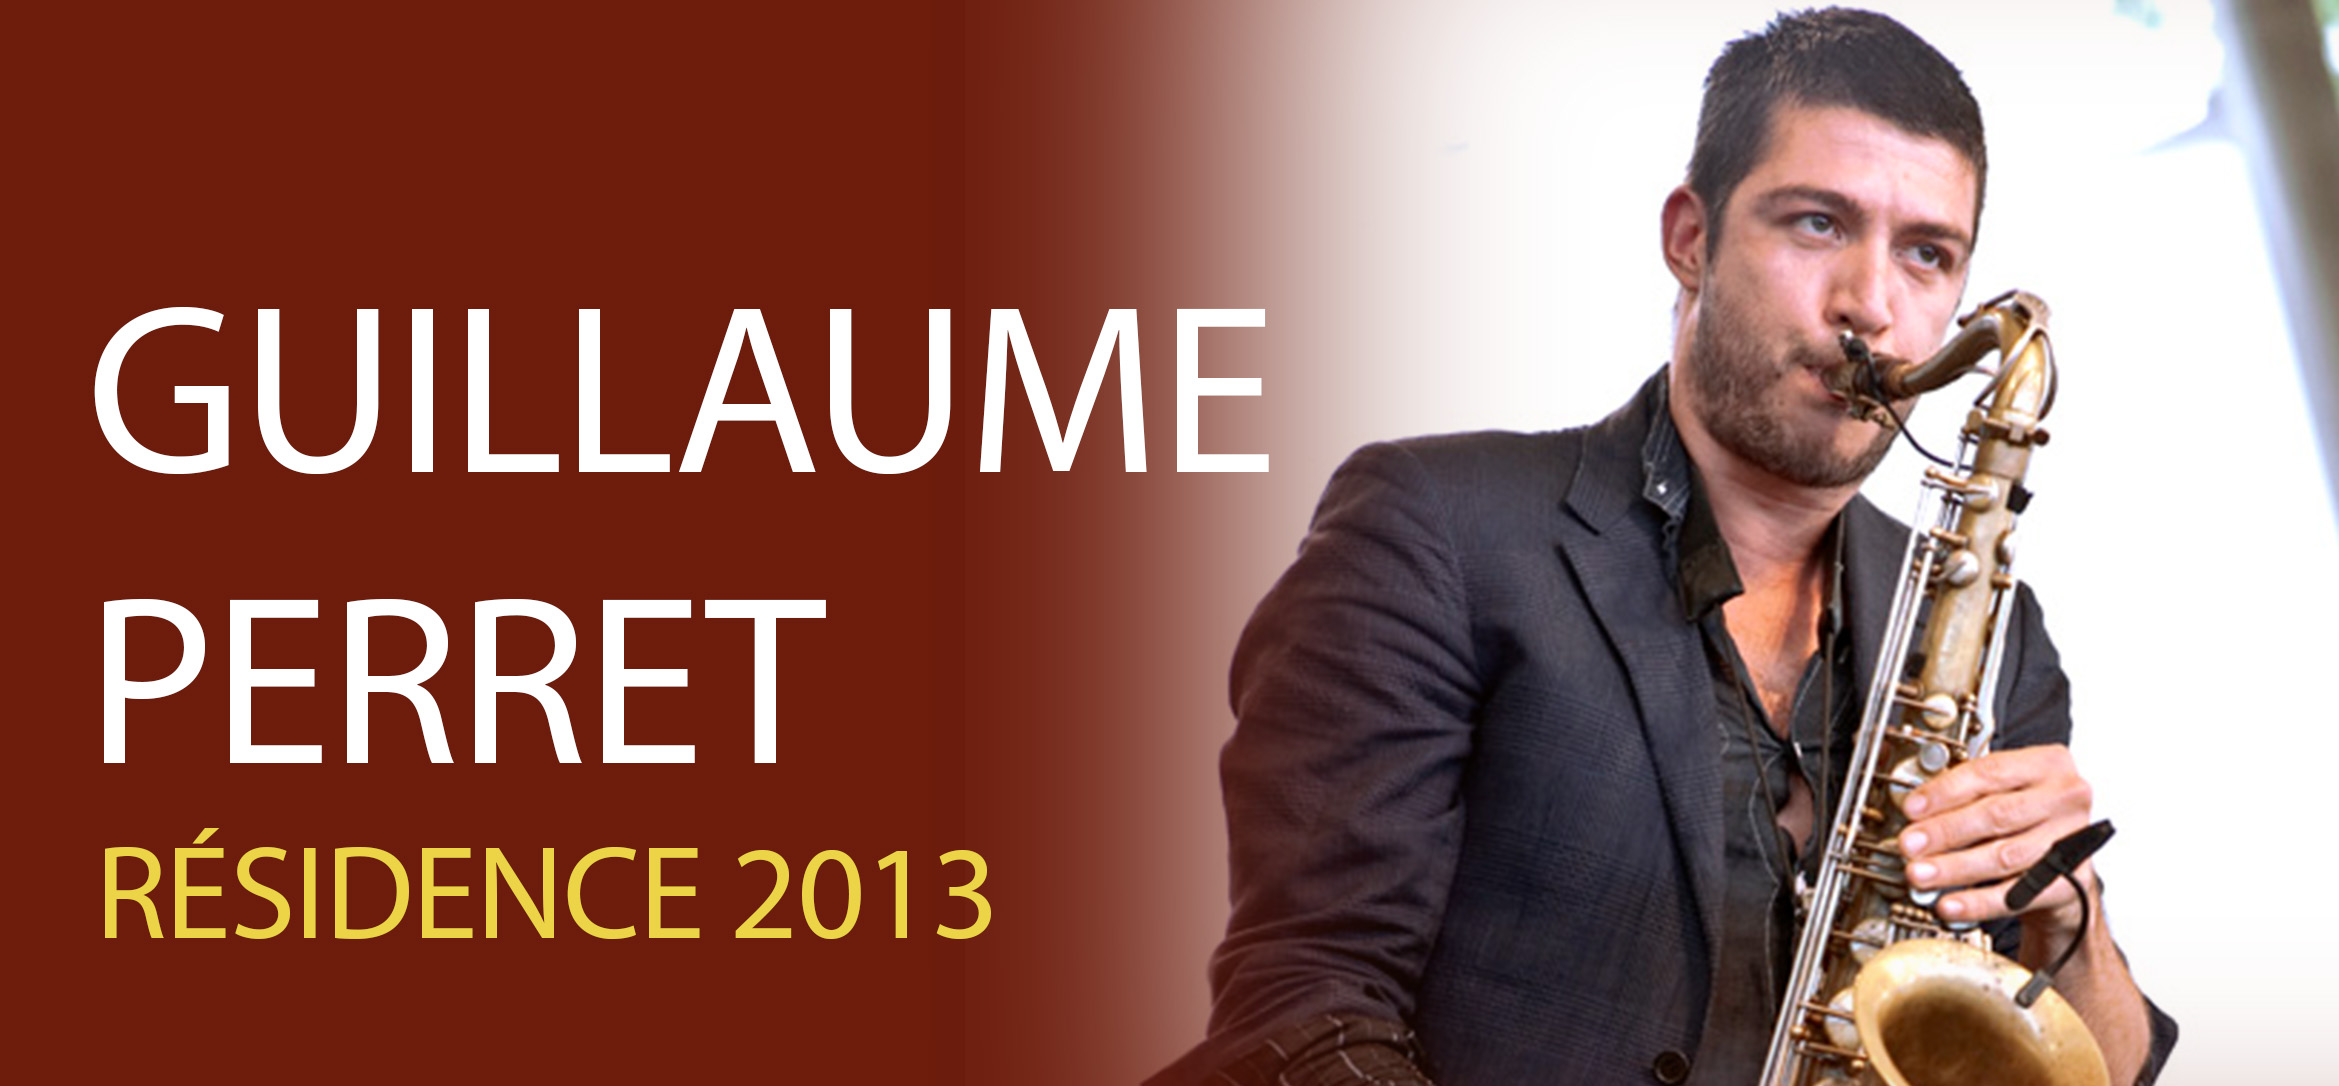 Guillaume Perret 2013